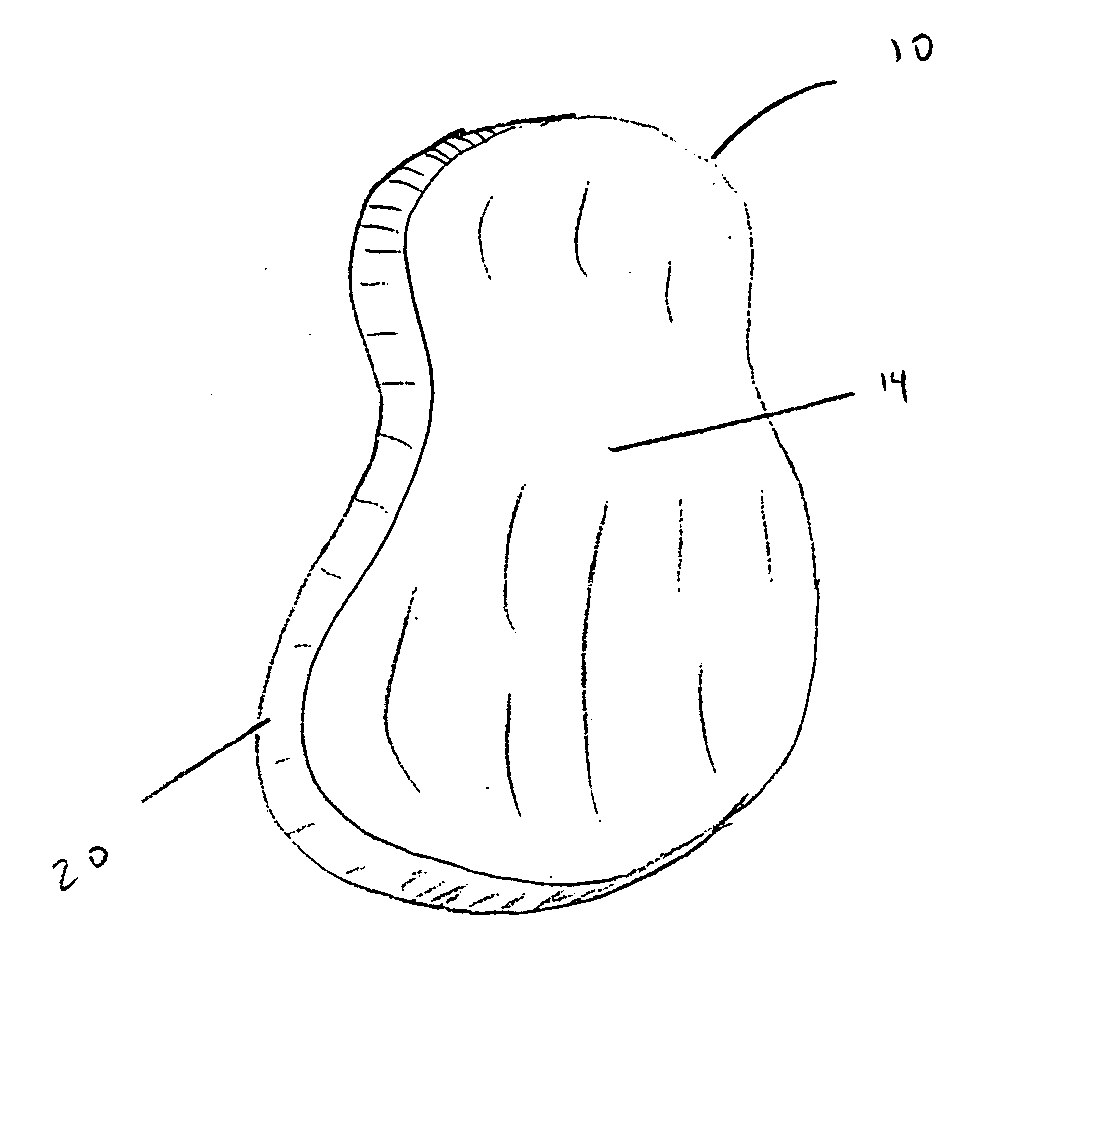 Shoulder implant for glenoid replacement and methods of use thereof